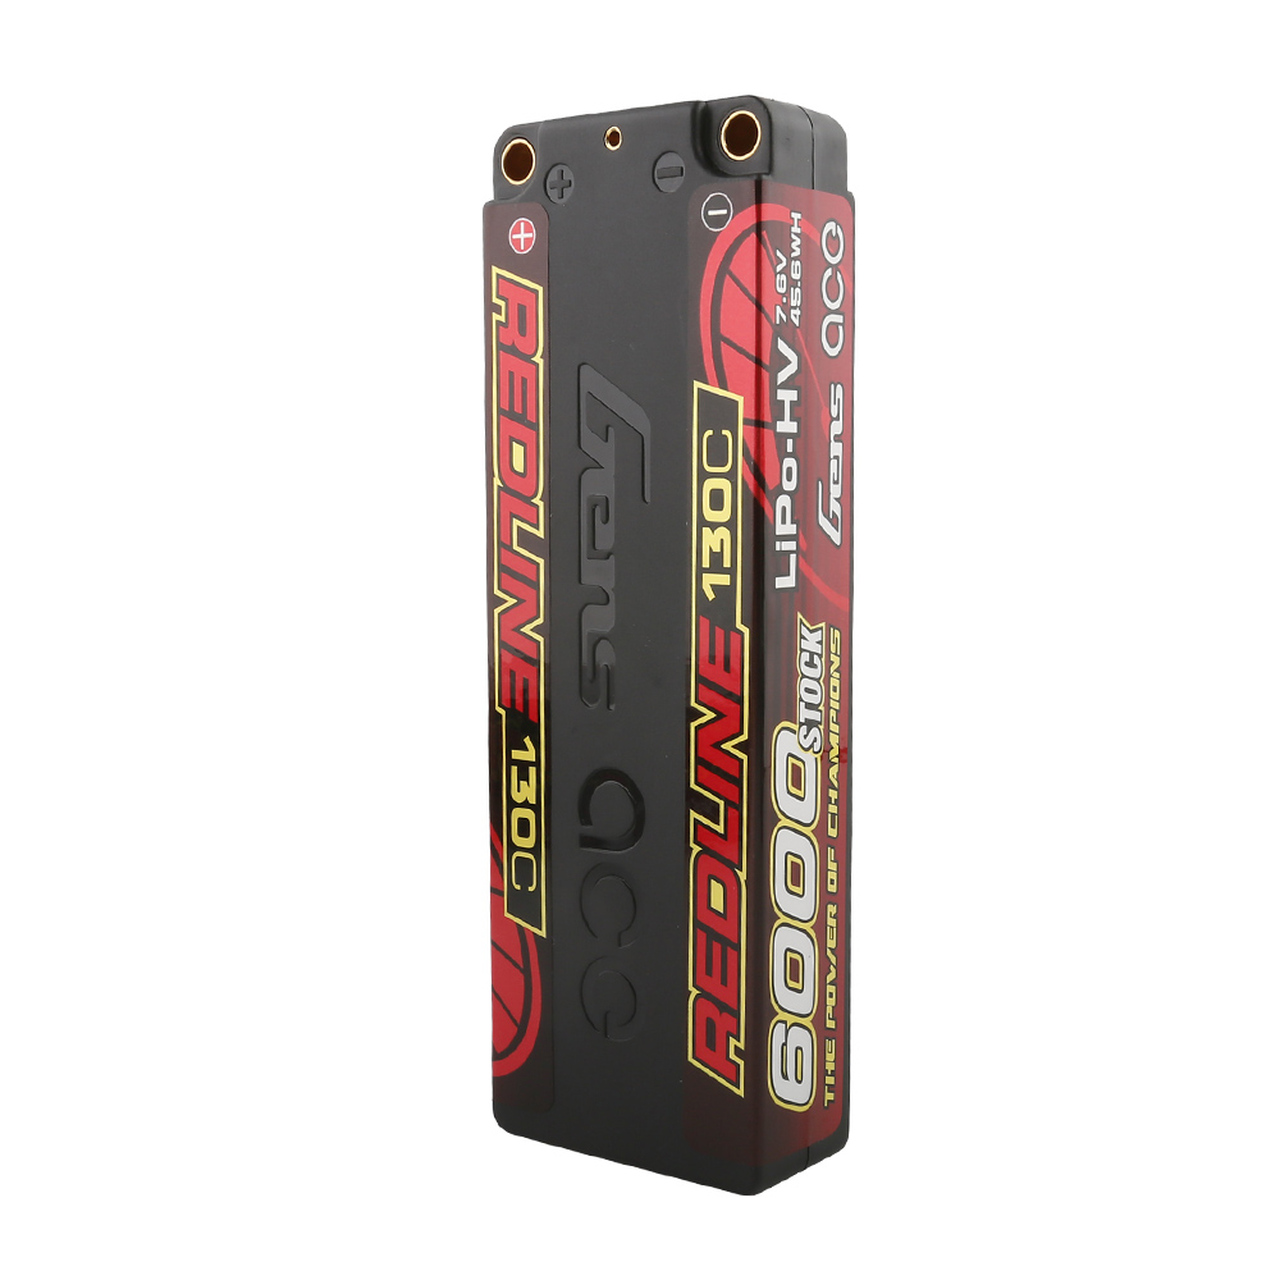 Gens ace 3500mAh 2S 7.4V RX Lipo Battery Pack with JR and EC3 Plug